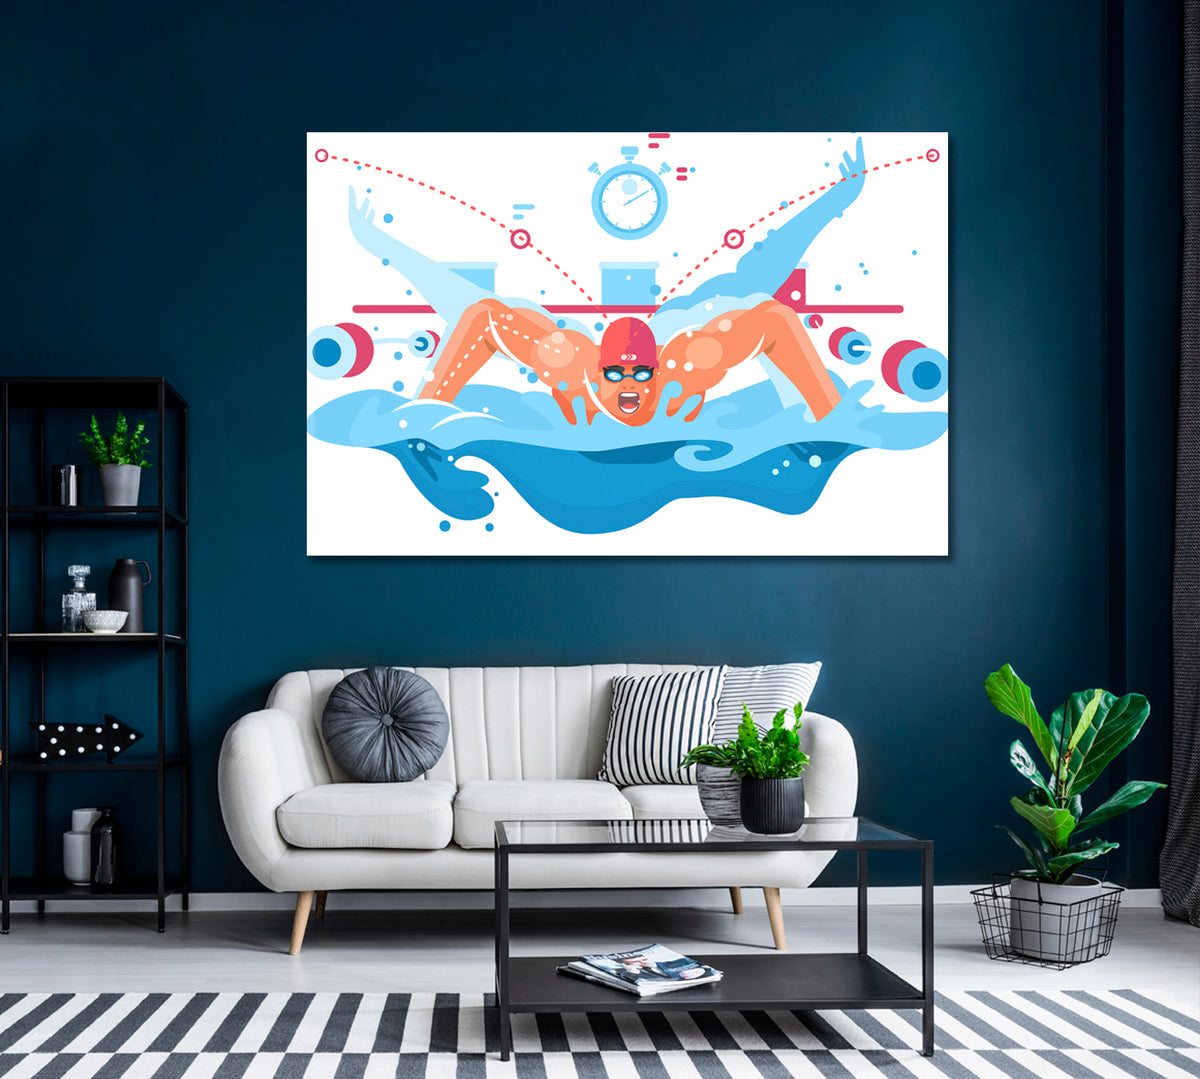 Professional Swimmer Canvas Print ArtLexy 1 Panel 24"x16" inches 